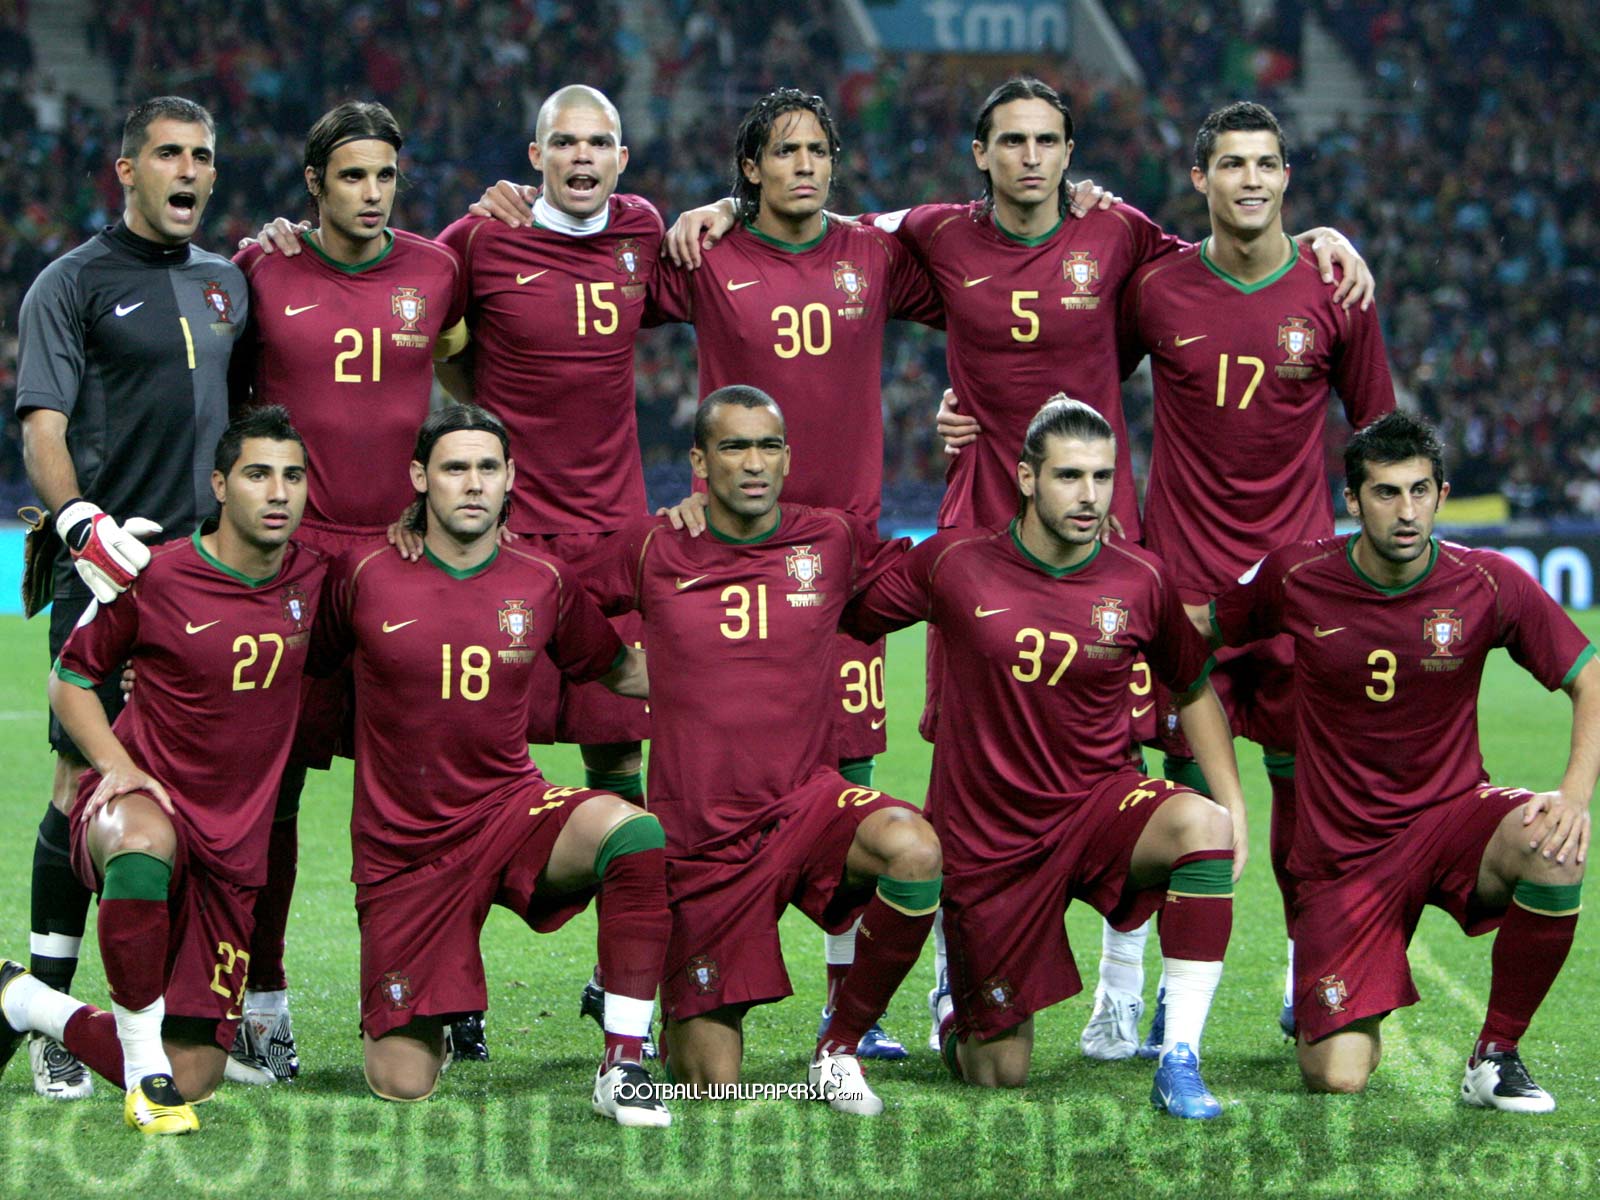 The Information Centre Portugal Football Team